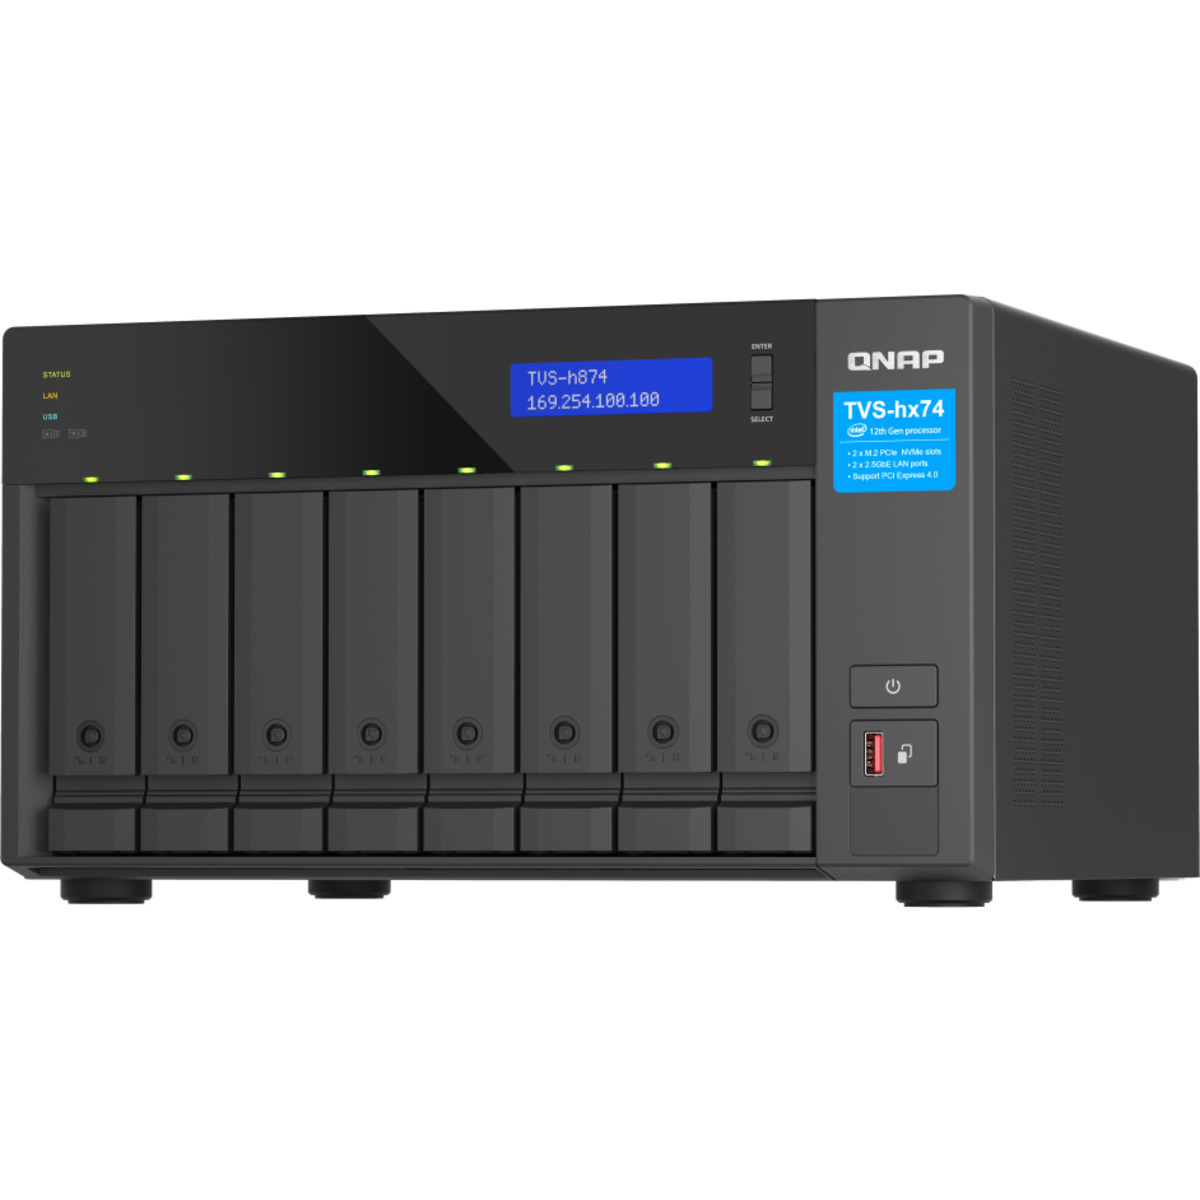 QNAP TVS-h874 Core i7 70tb 8-Bay Desktop Multimedia / Power User / Business NAS - Network Attached Storage Device 7x10tb Western Digital Red Plus WD101EFBX 3.5 7200rpm SATA 6Gb/s HDD NAS Class Drives Installed - Burn-In Tested TVS-h874 Core i7